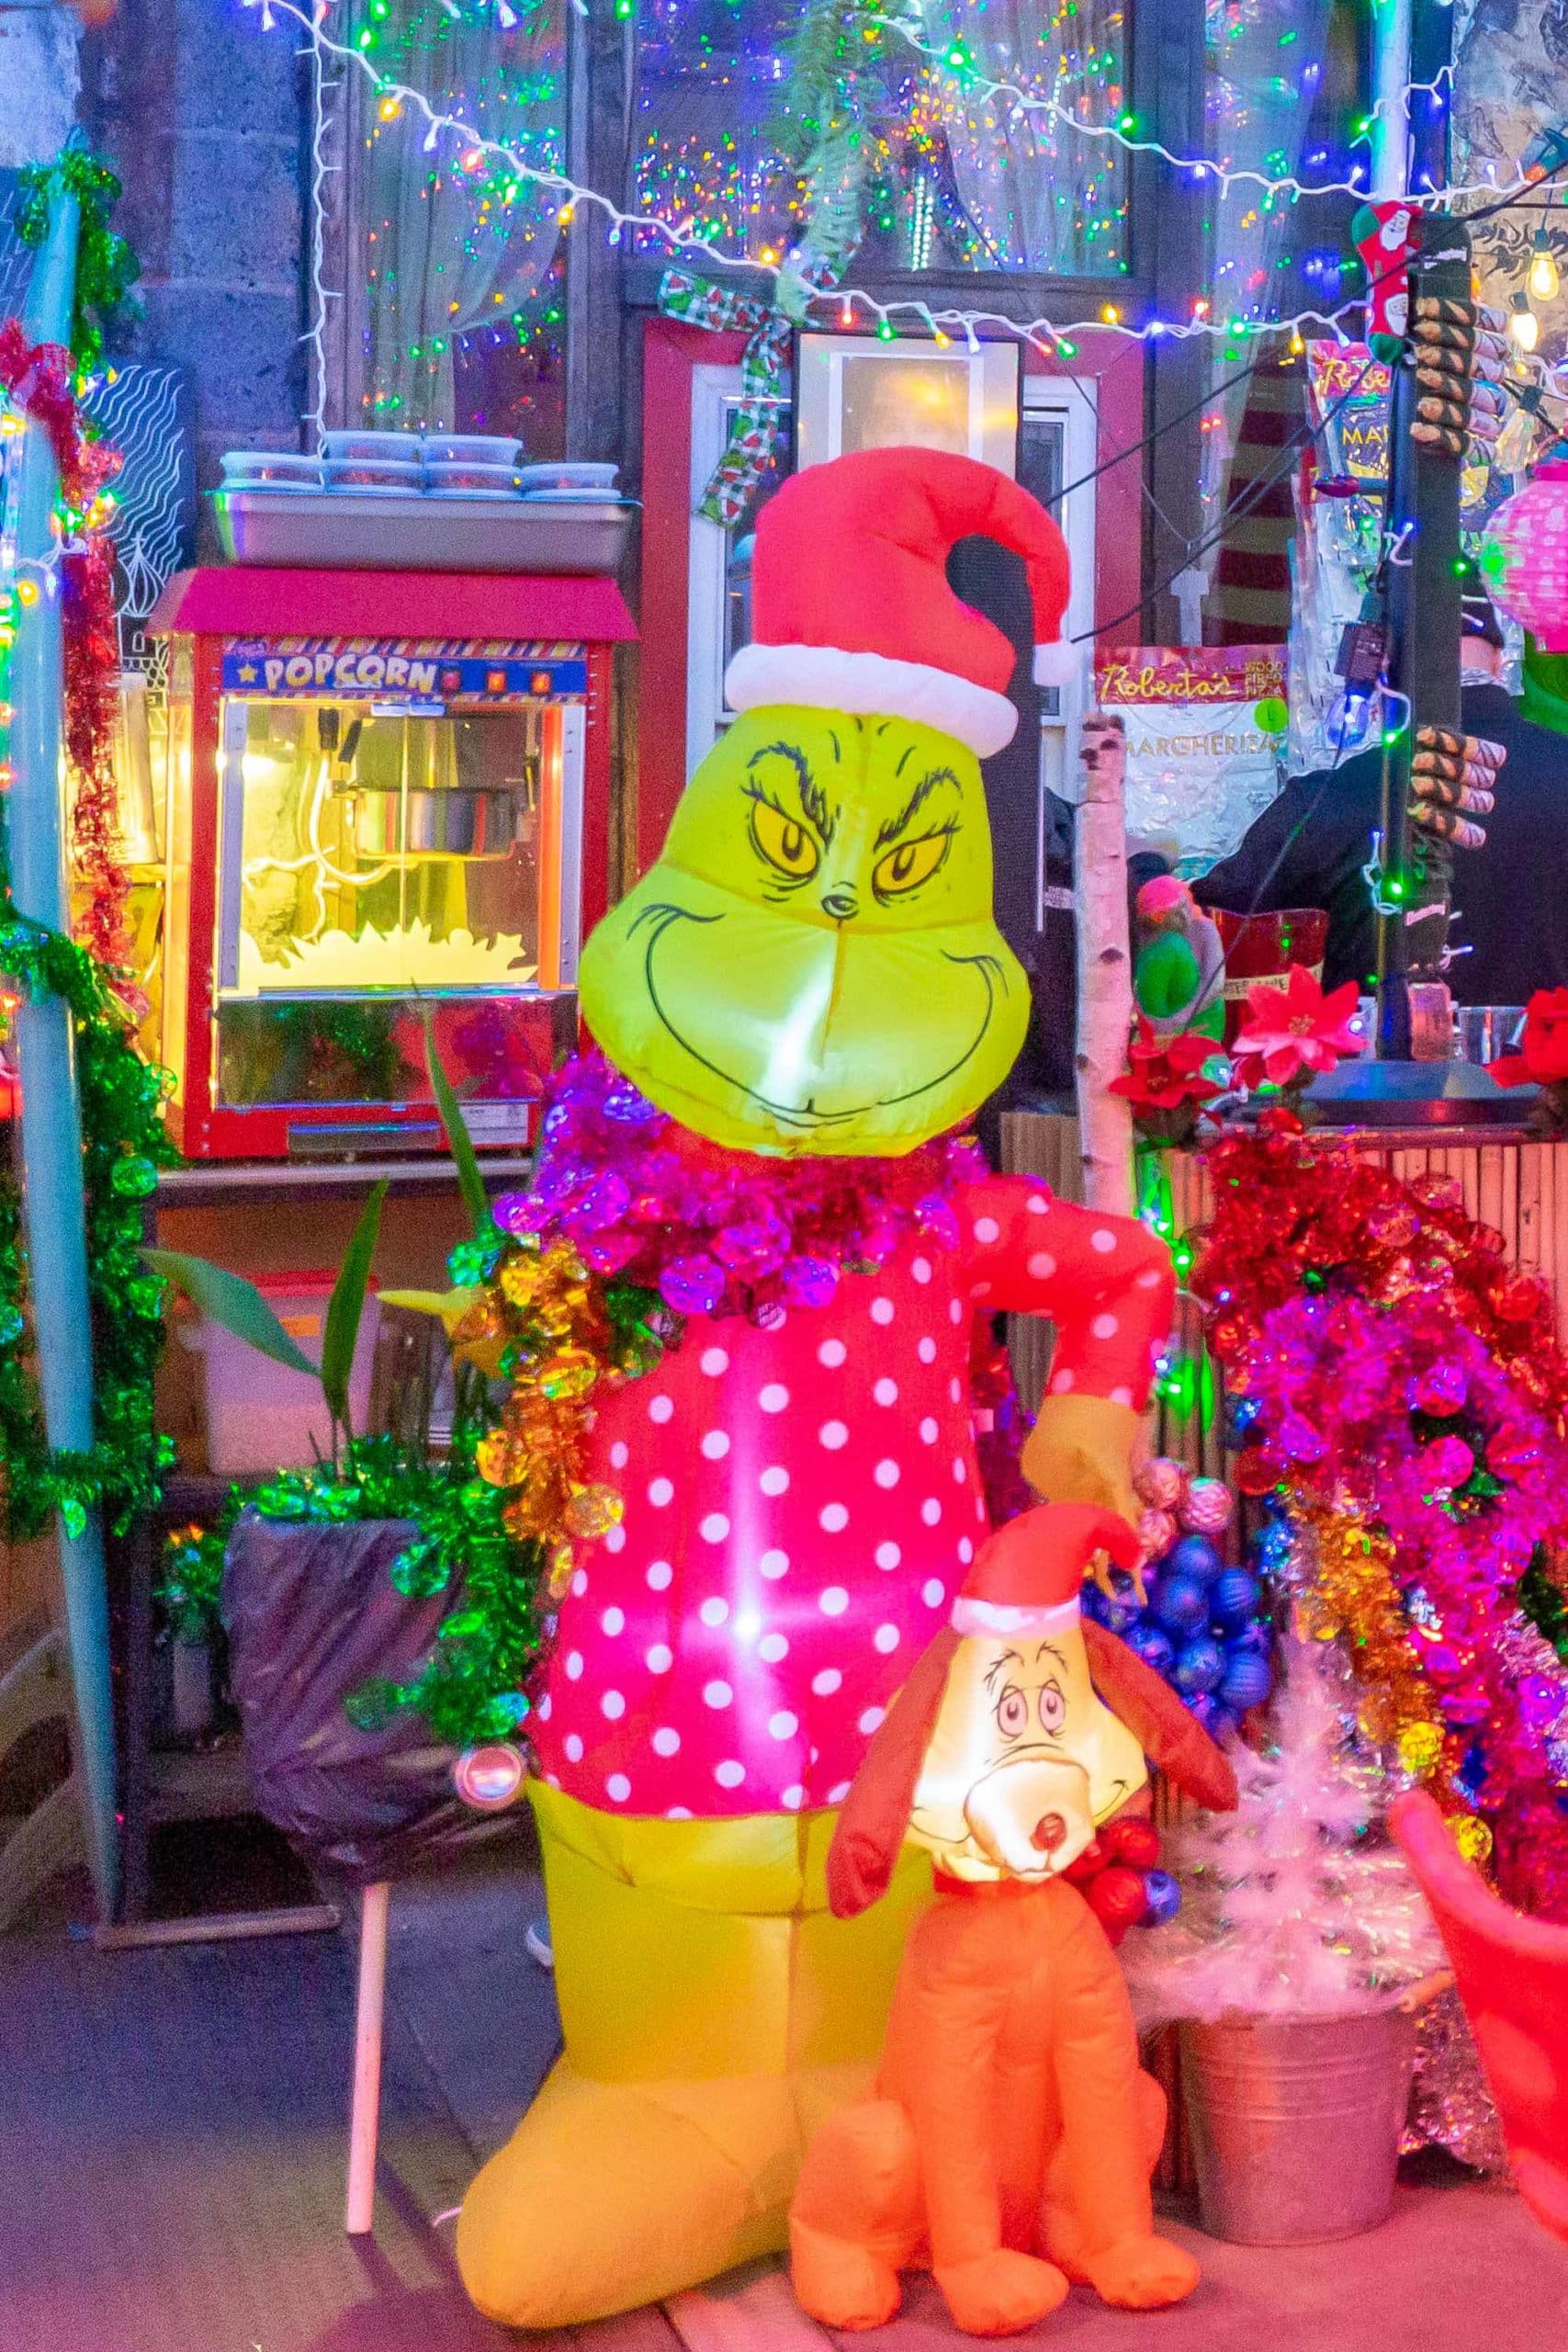 The Grinch Christmas Blow Up Decoration at Roberta's Grinchy's pop up